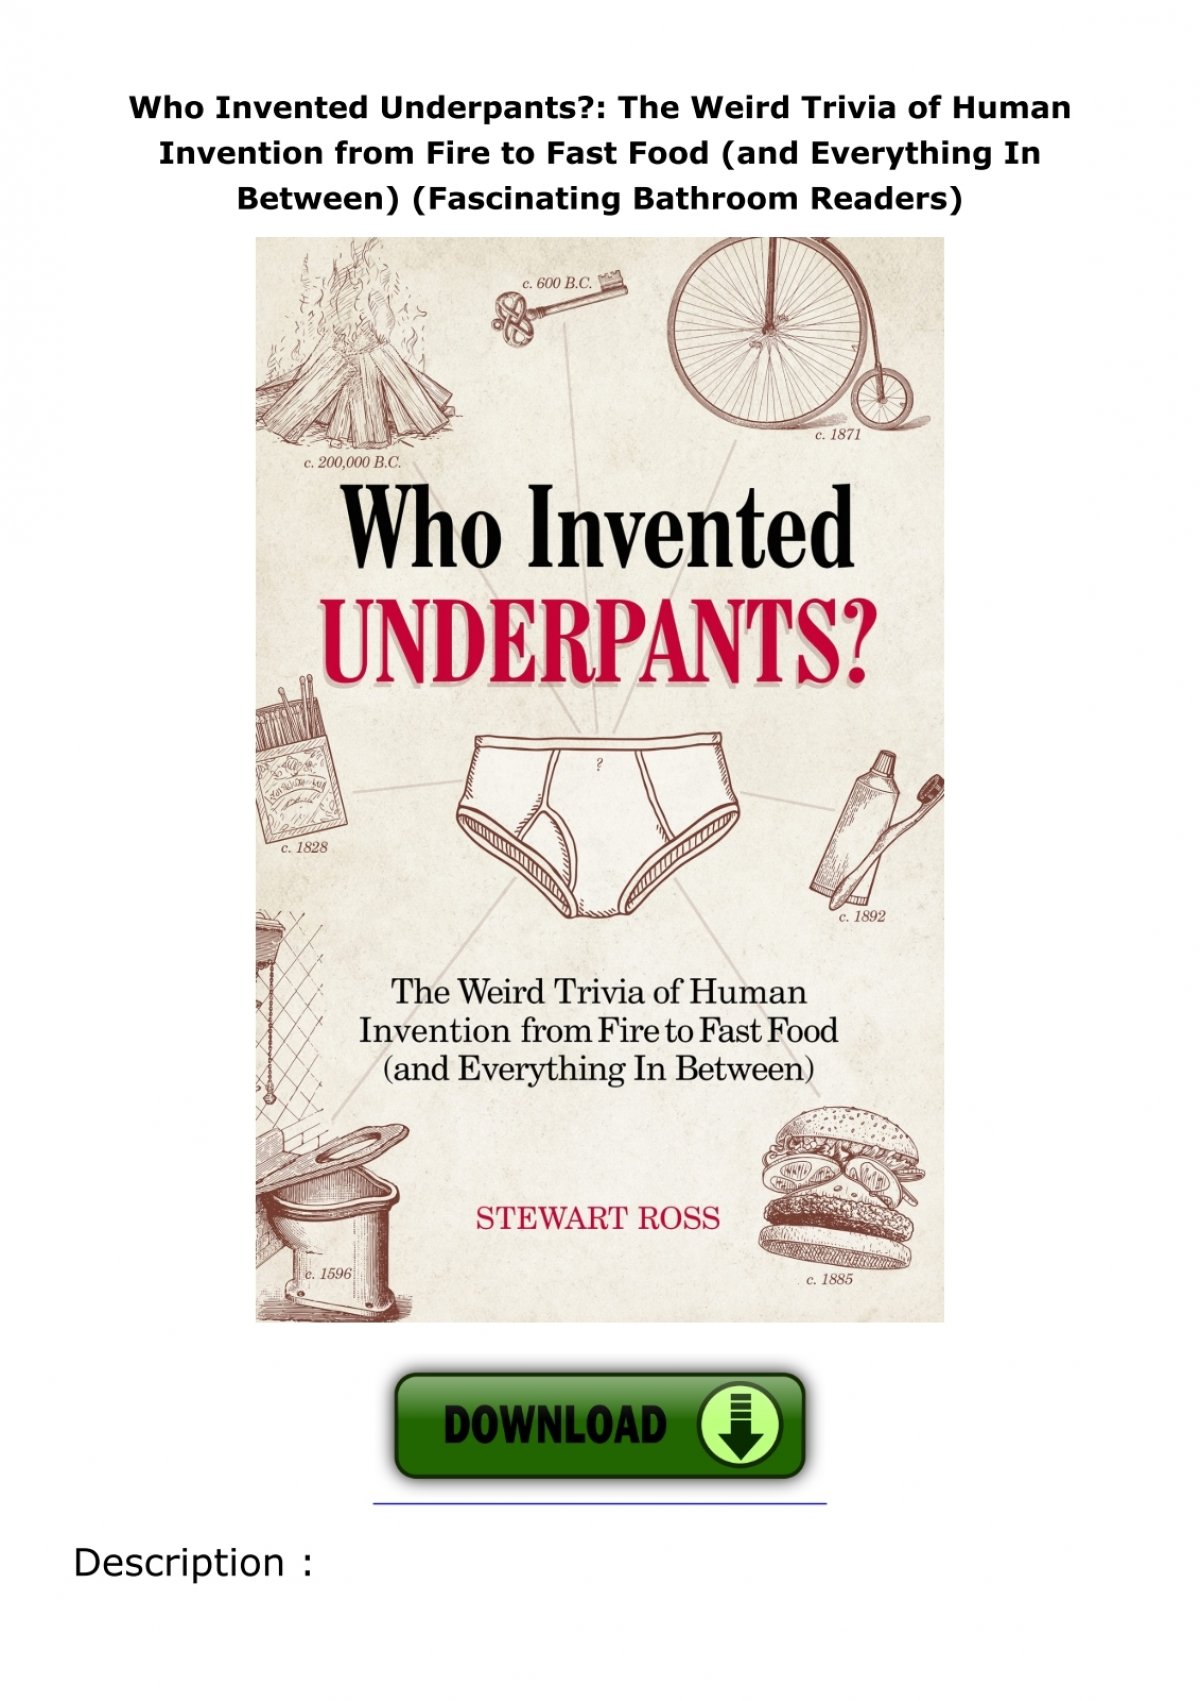 Who Invented Underpants?: The Weird Trivia of Human Invention, from Fire to  Fast Food (and Everything In Between) (Fascinating Bathroom Readers)